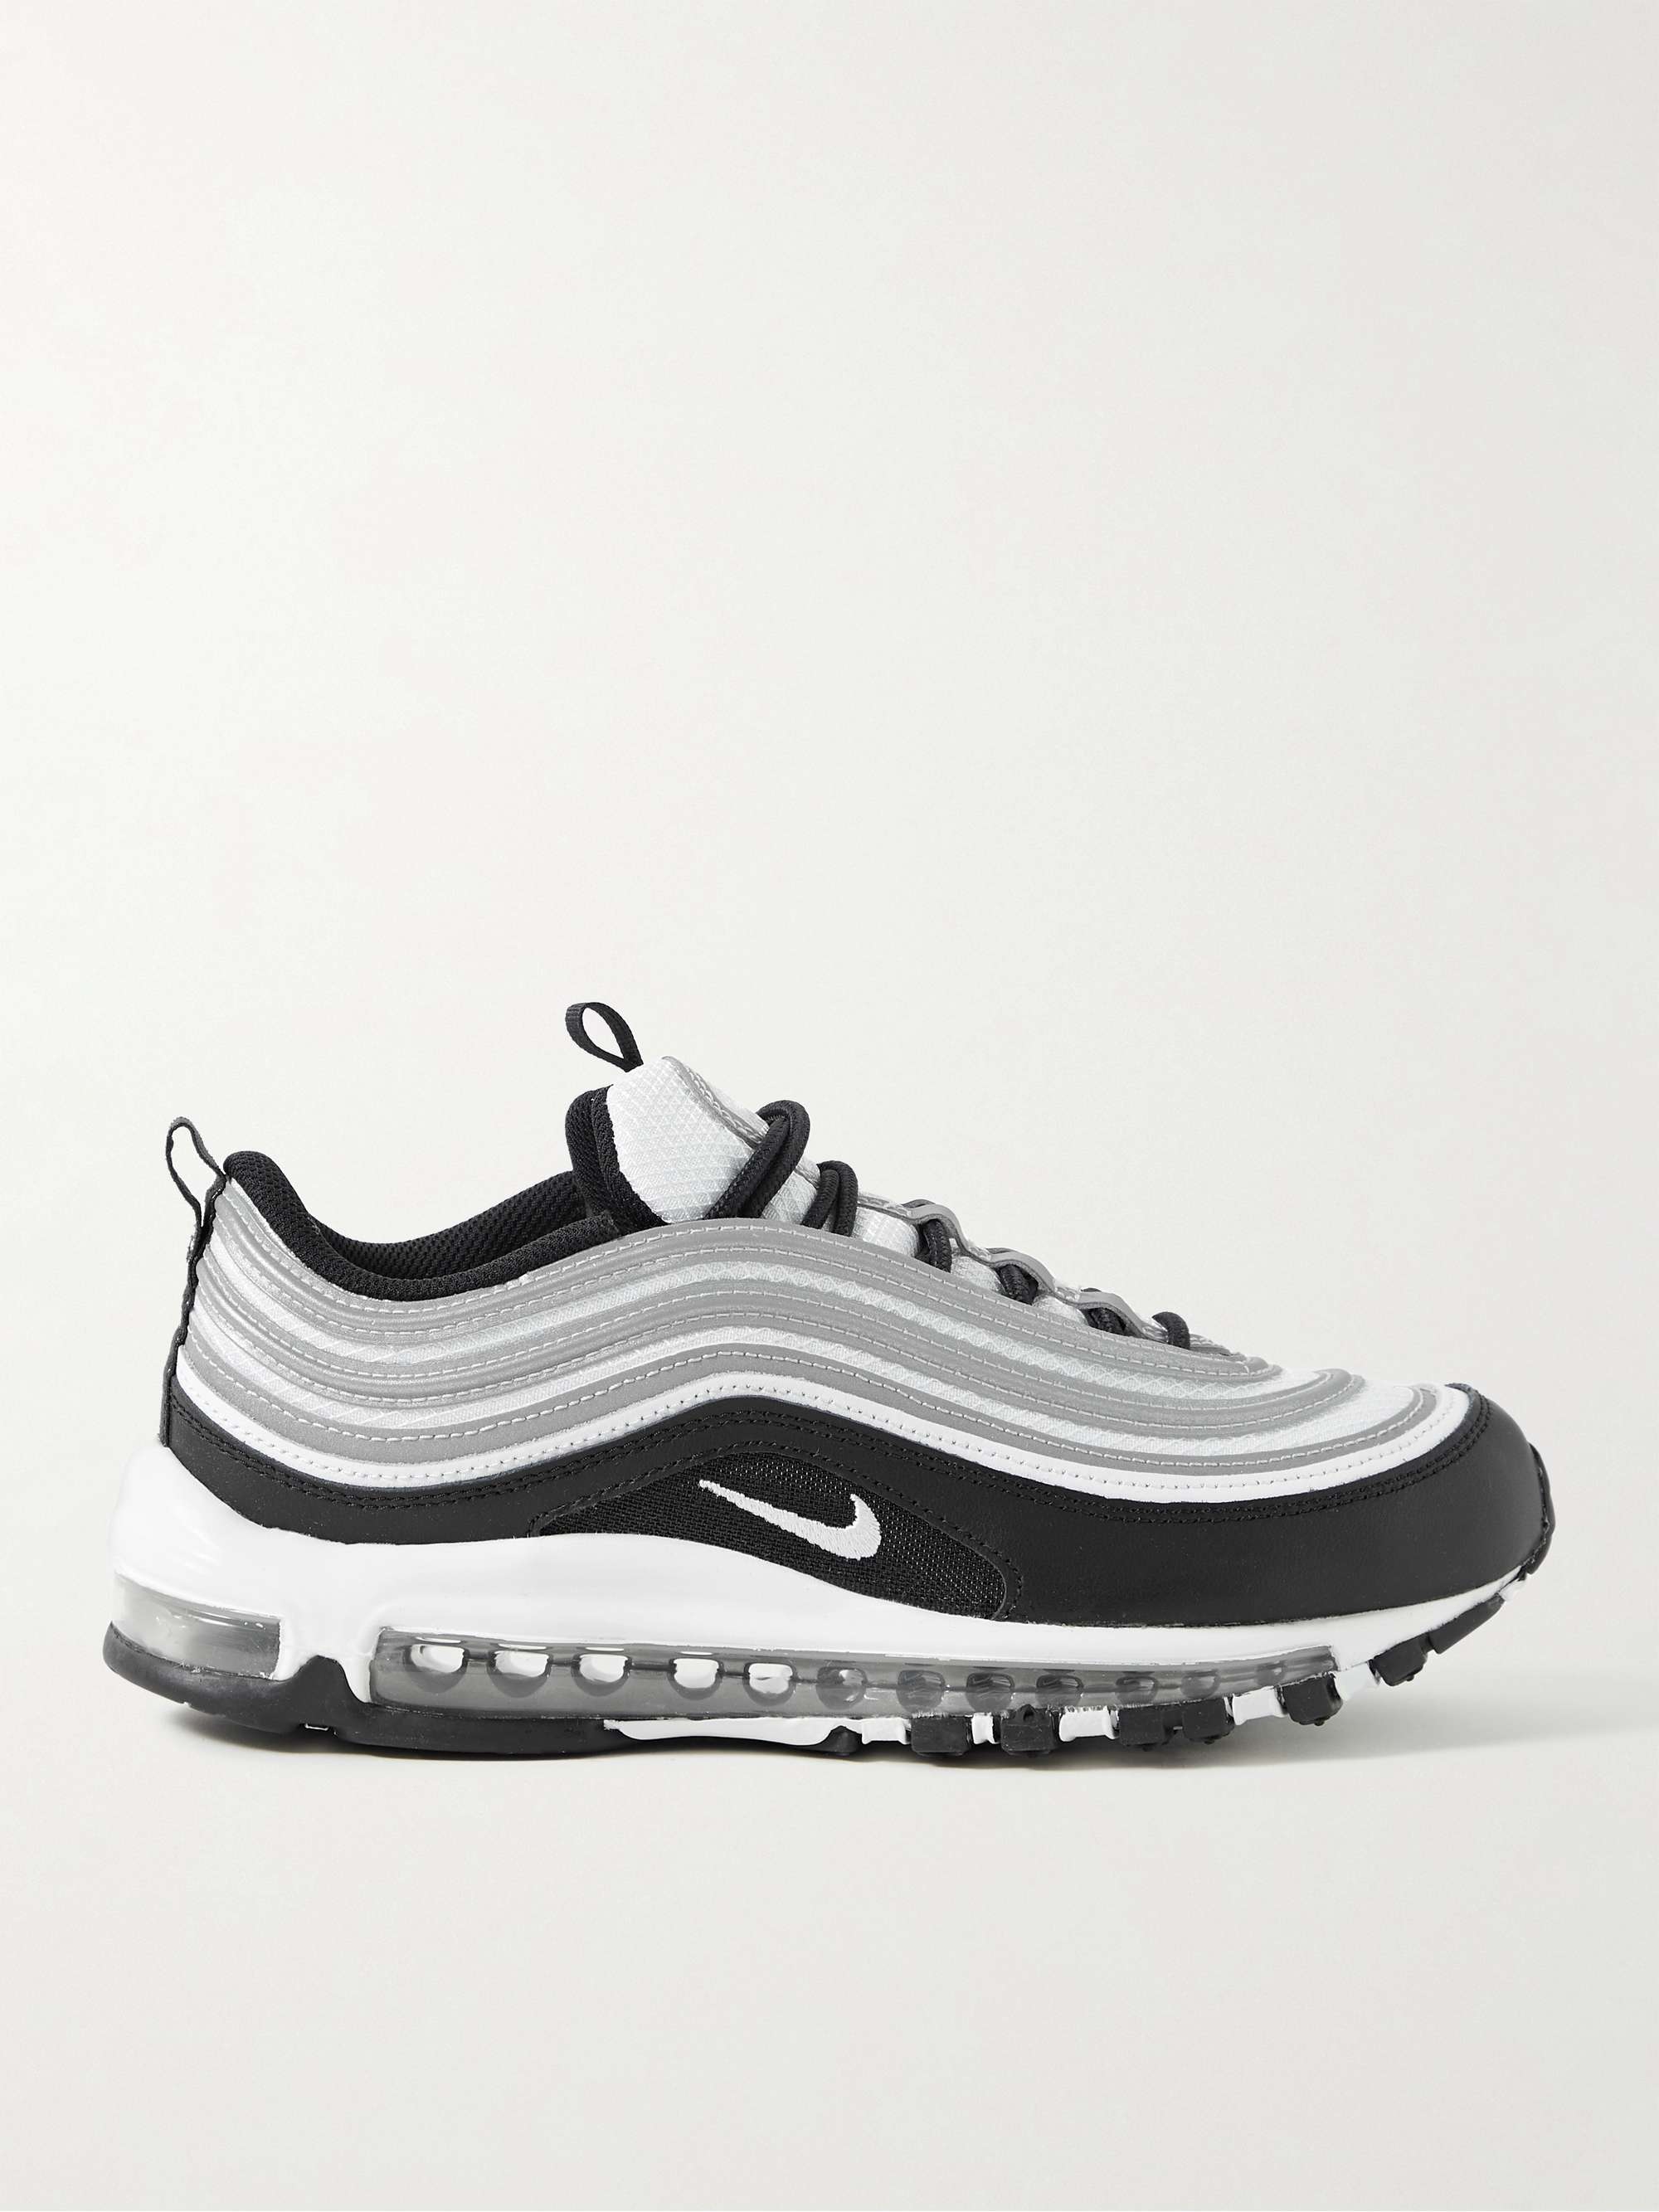 Black Air Max 97 Leather and Mesh Sneakers | NIKE | MR PORTER